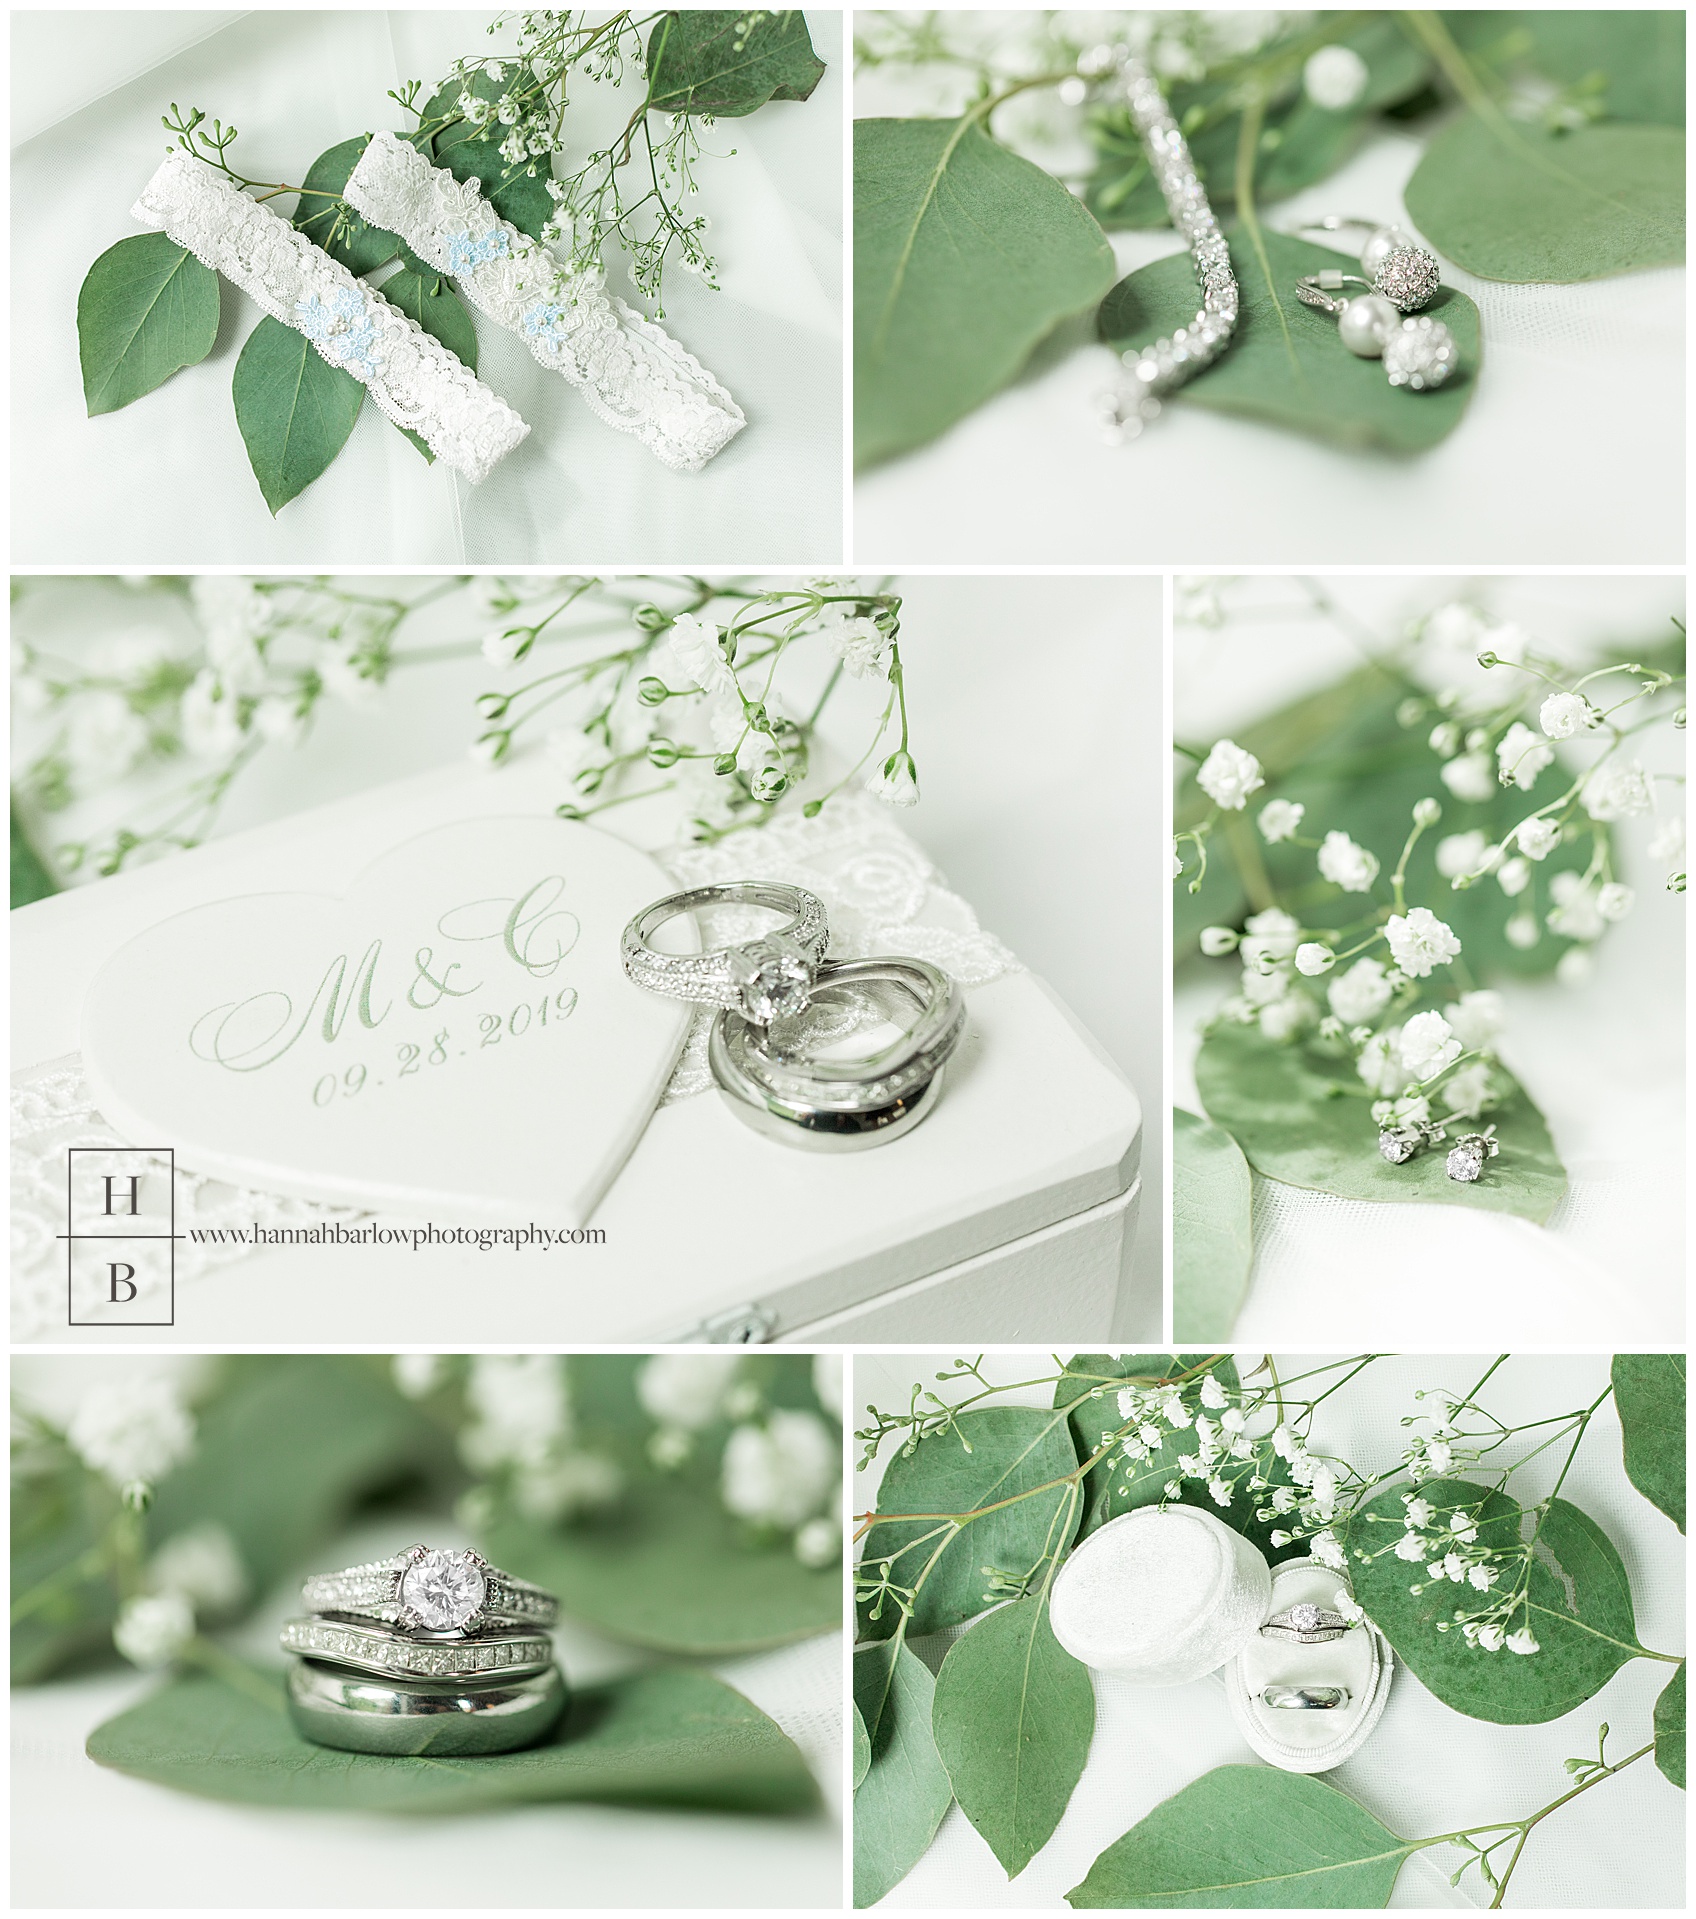 Romantic White, Ivory, and Green Wedding Details